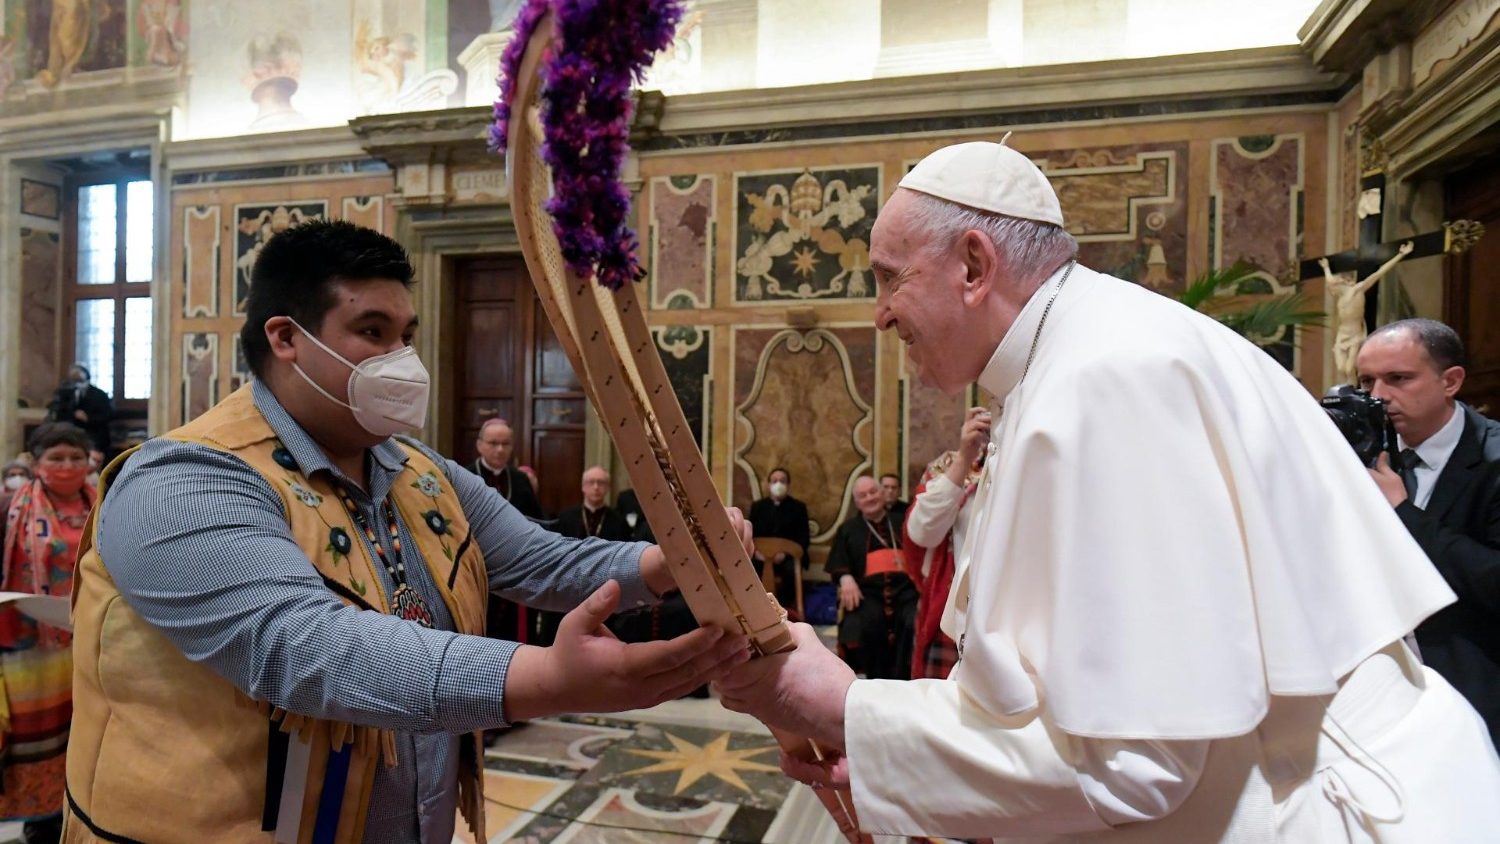 Canada: Trudeau welcomes pope's apology